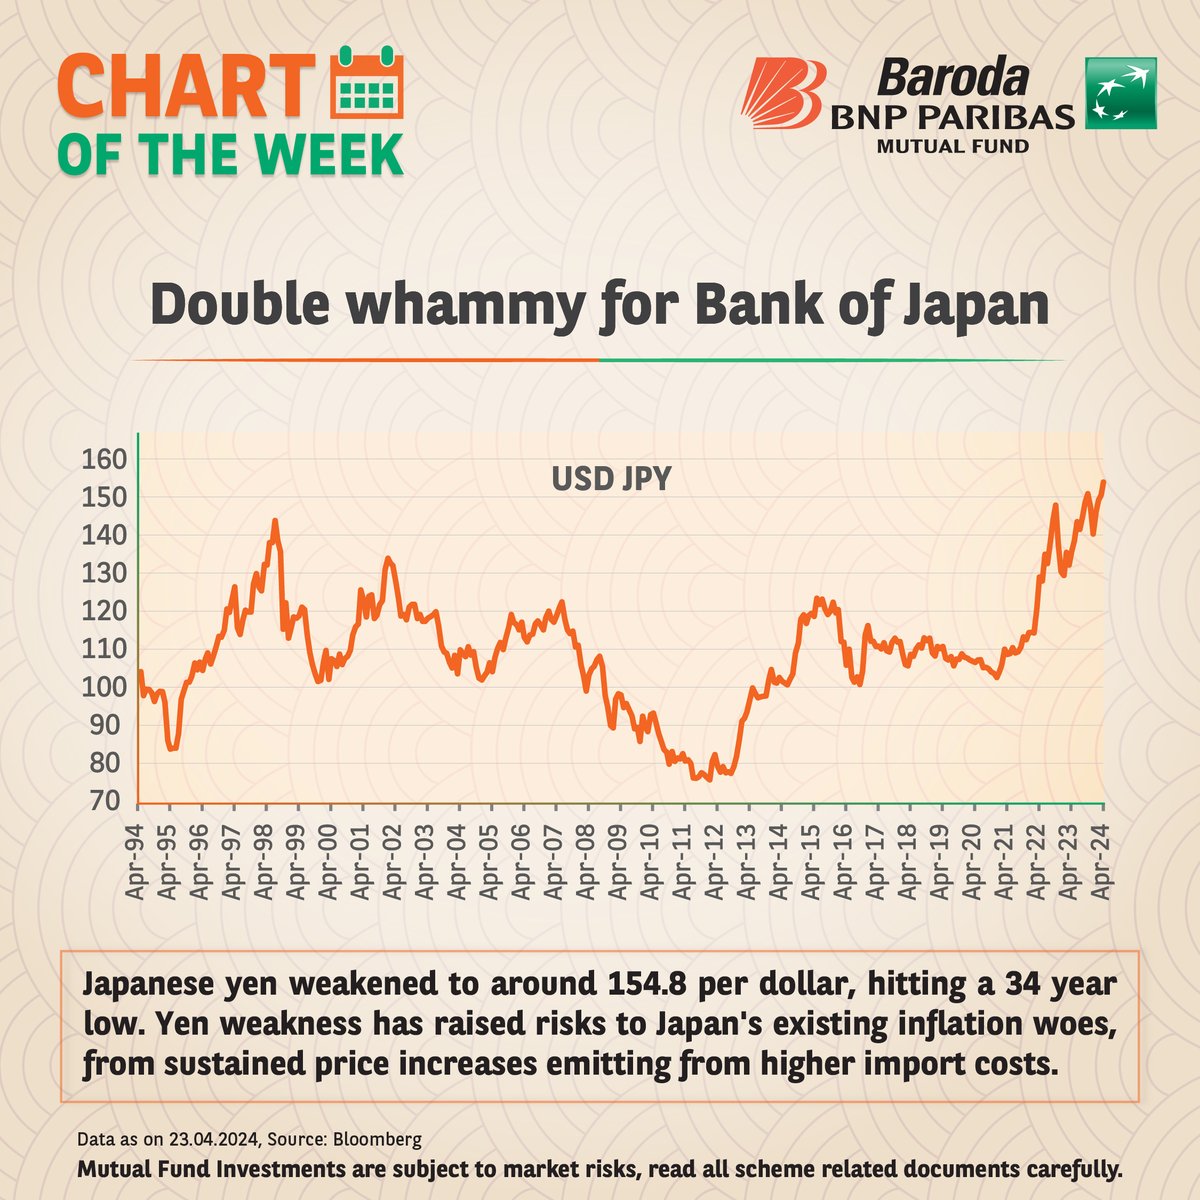 Take a look at the #ChartOfTheWeek to understand the impact of the weakening Japanese yen, which has reached a 34-year low, on their financial landscape.

#BarodaBNPParibas #Insights #Chart #Knowledge #MutualFundsSahiHai #MutualFund